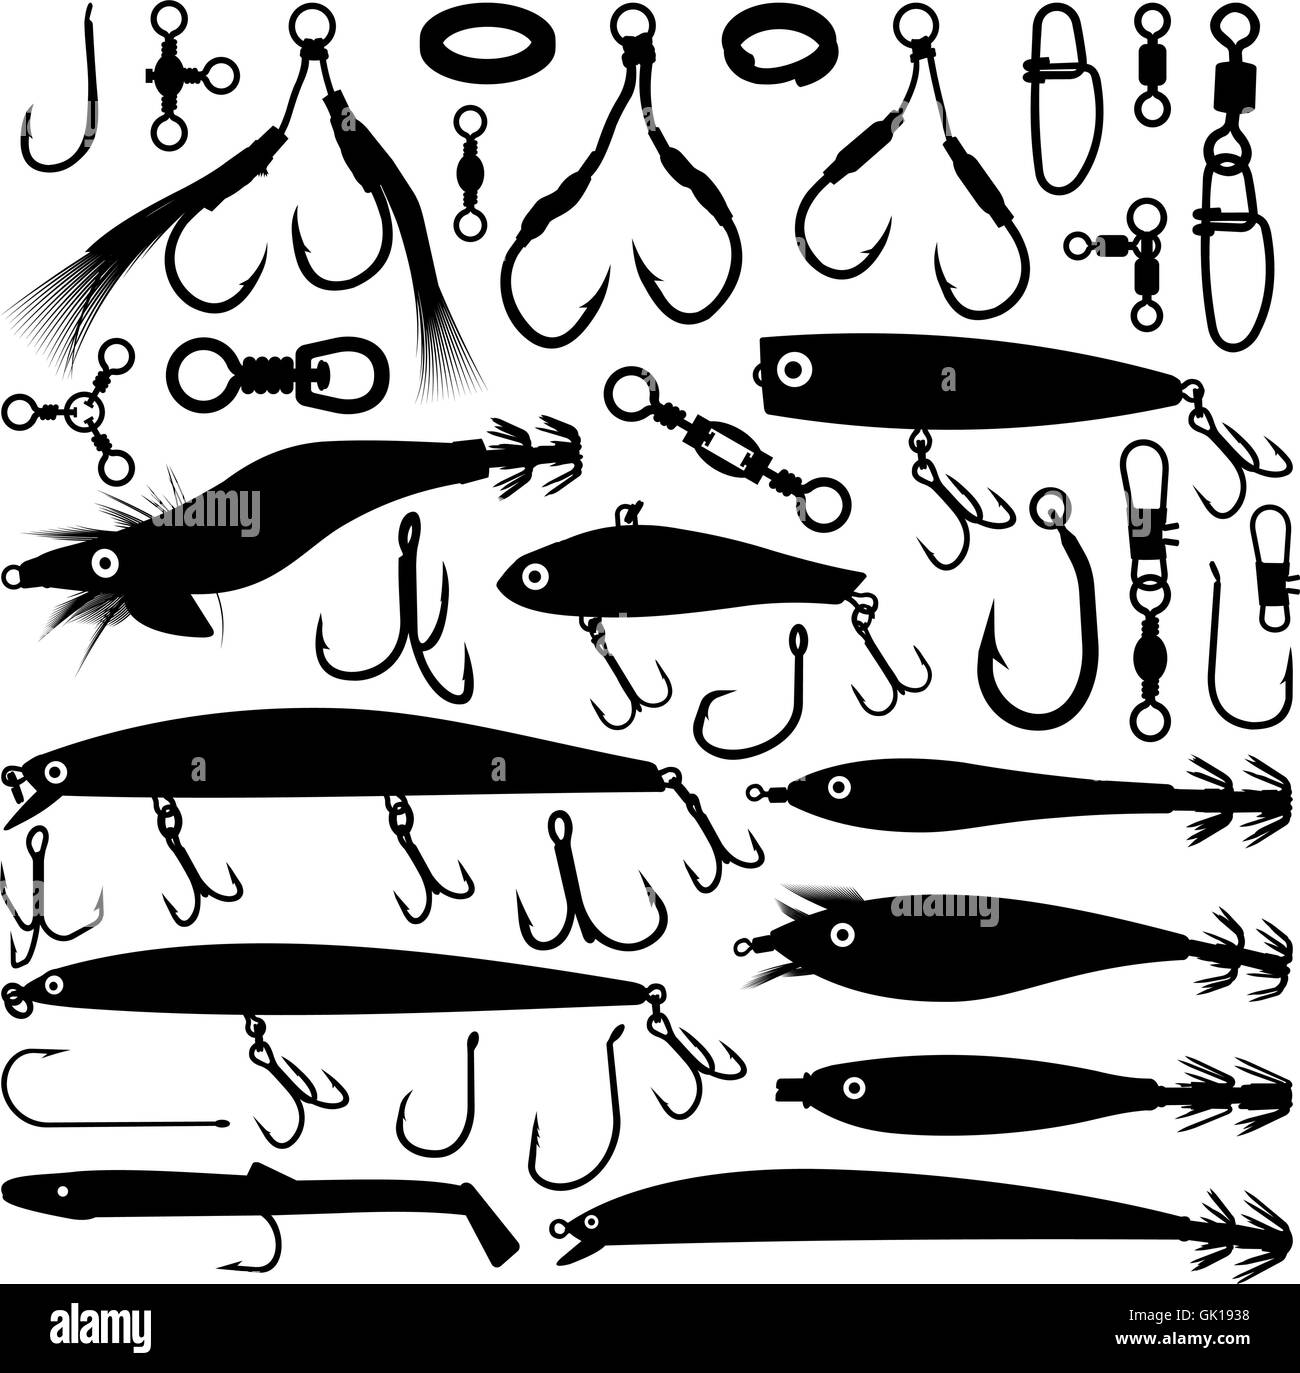 Fishing lure silhouettes Stock Vector